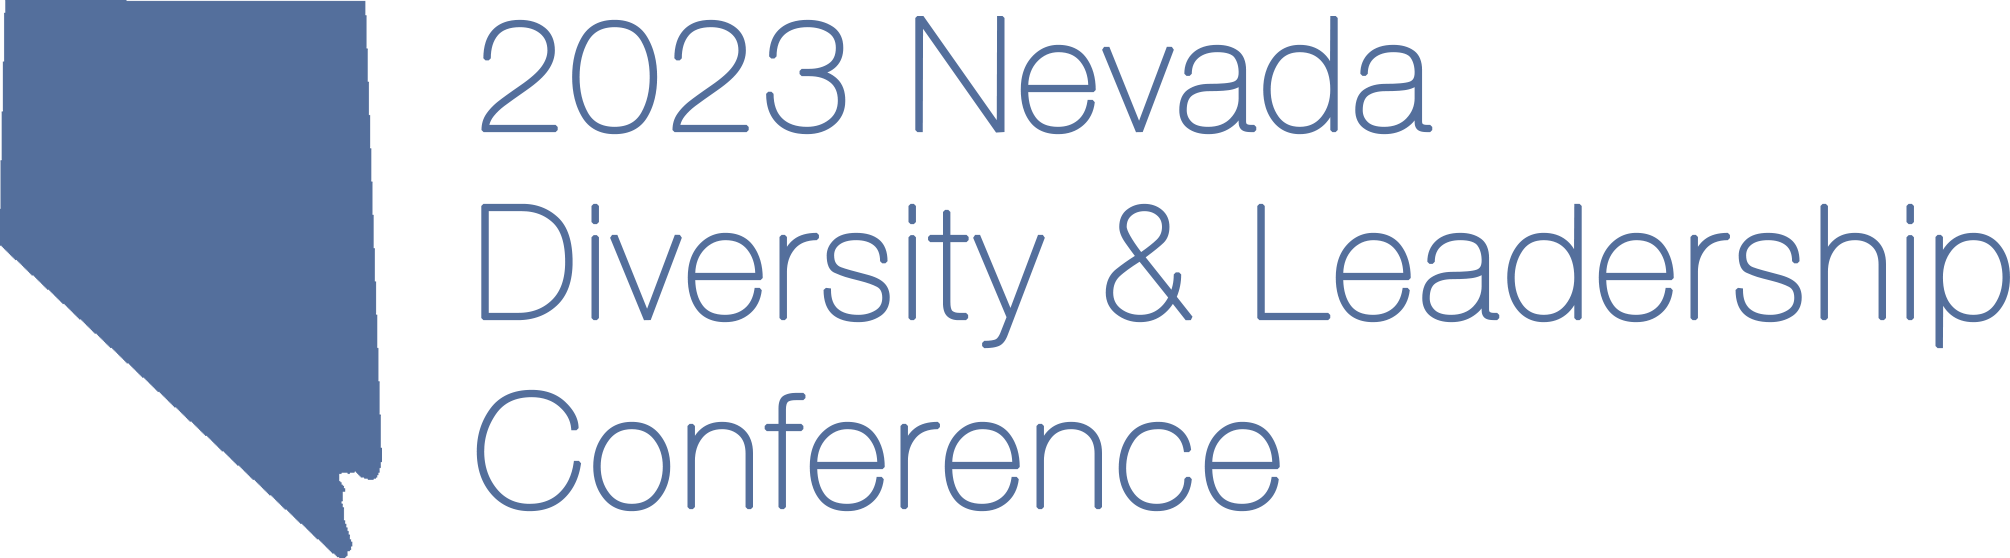 2023 1st Annual Nevada Diversity & Leadership Conference